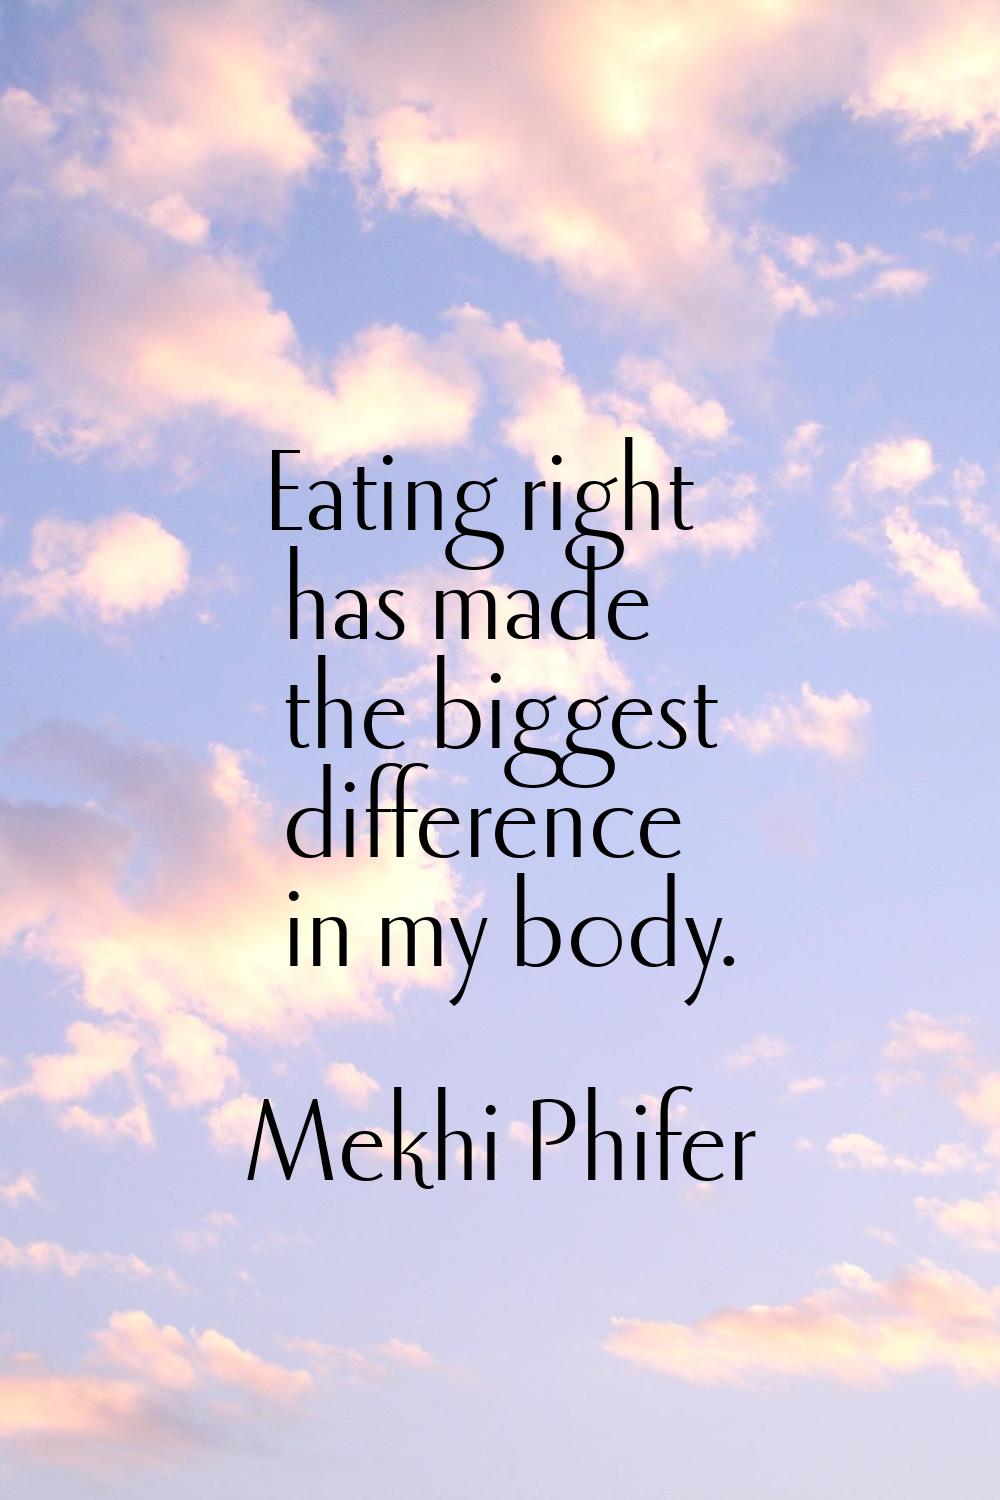 Eating right has made the biggest difference in my body.